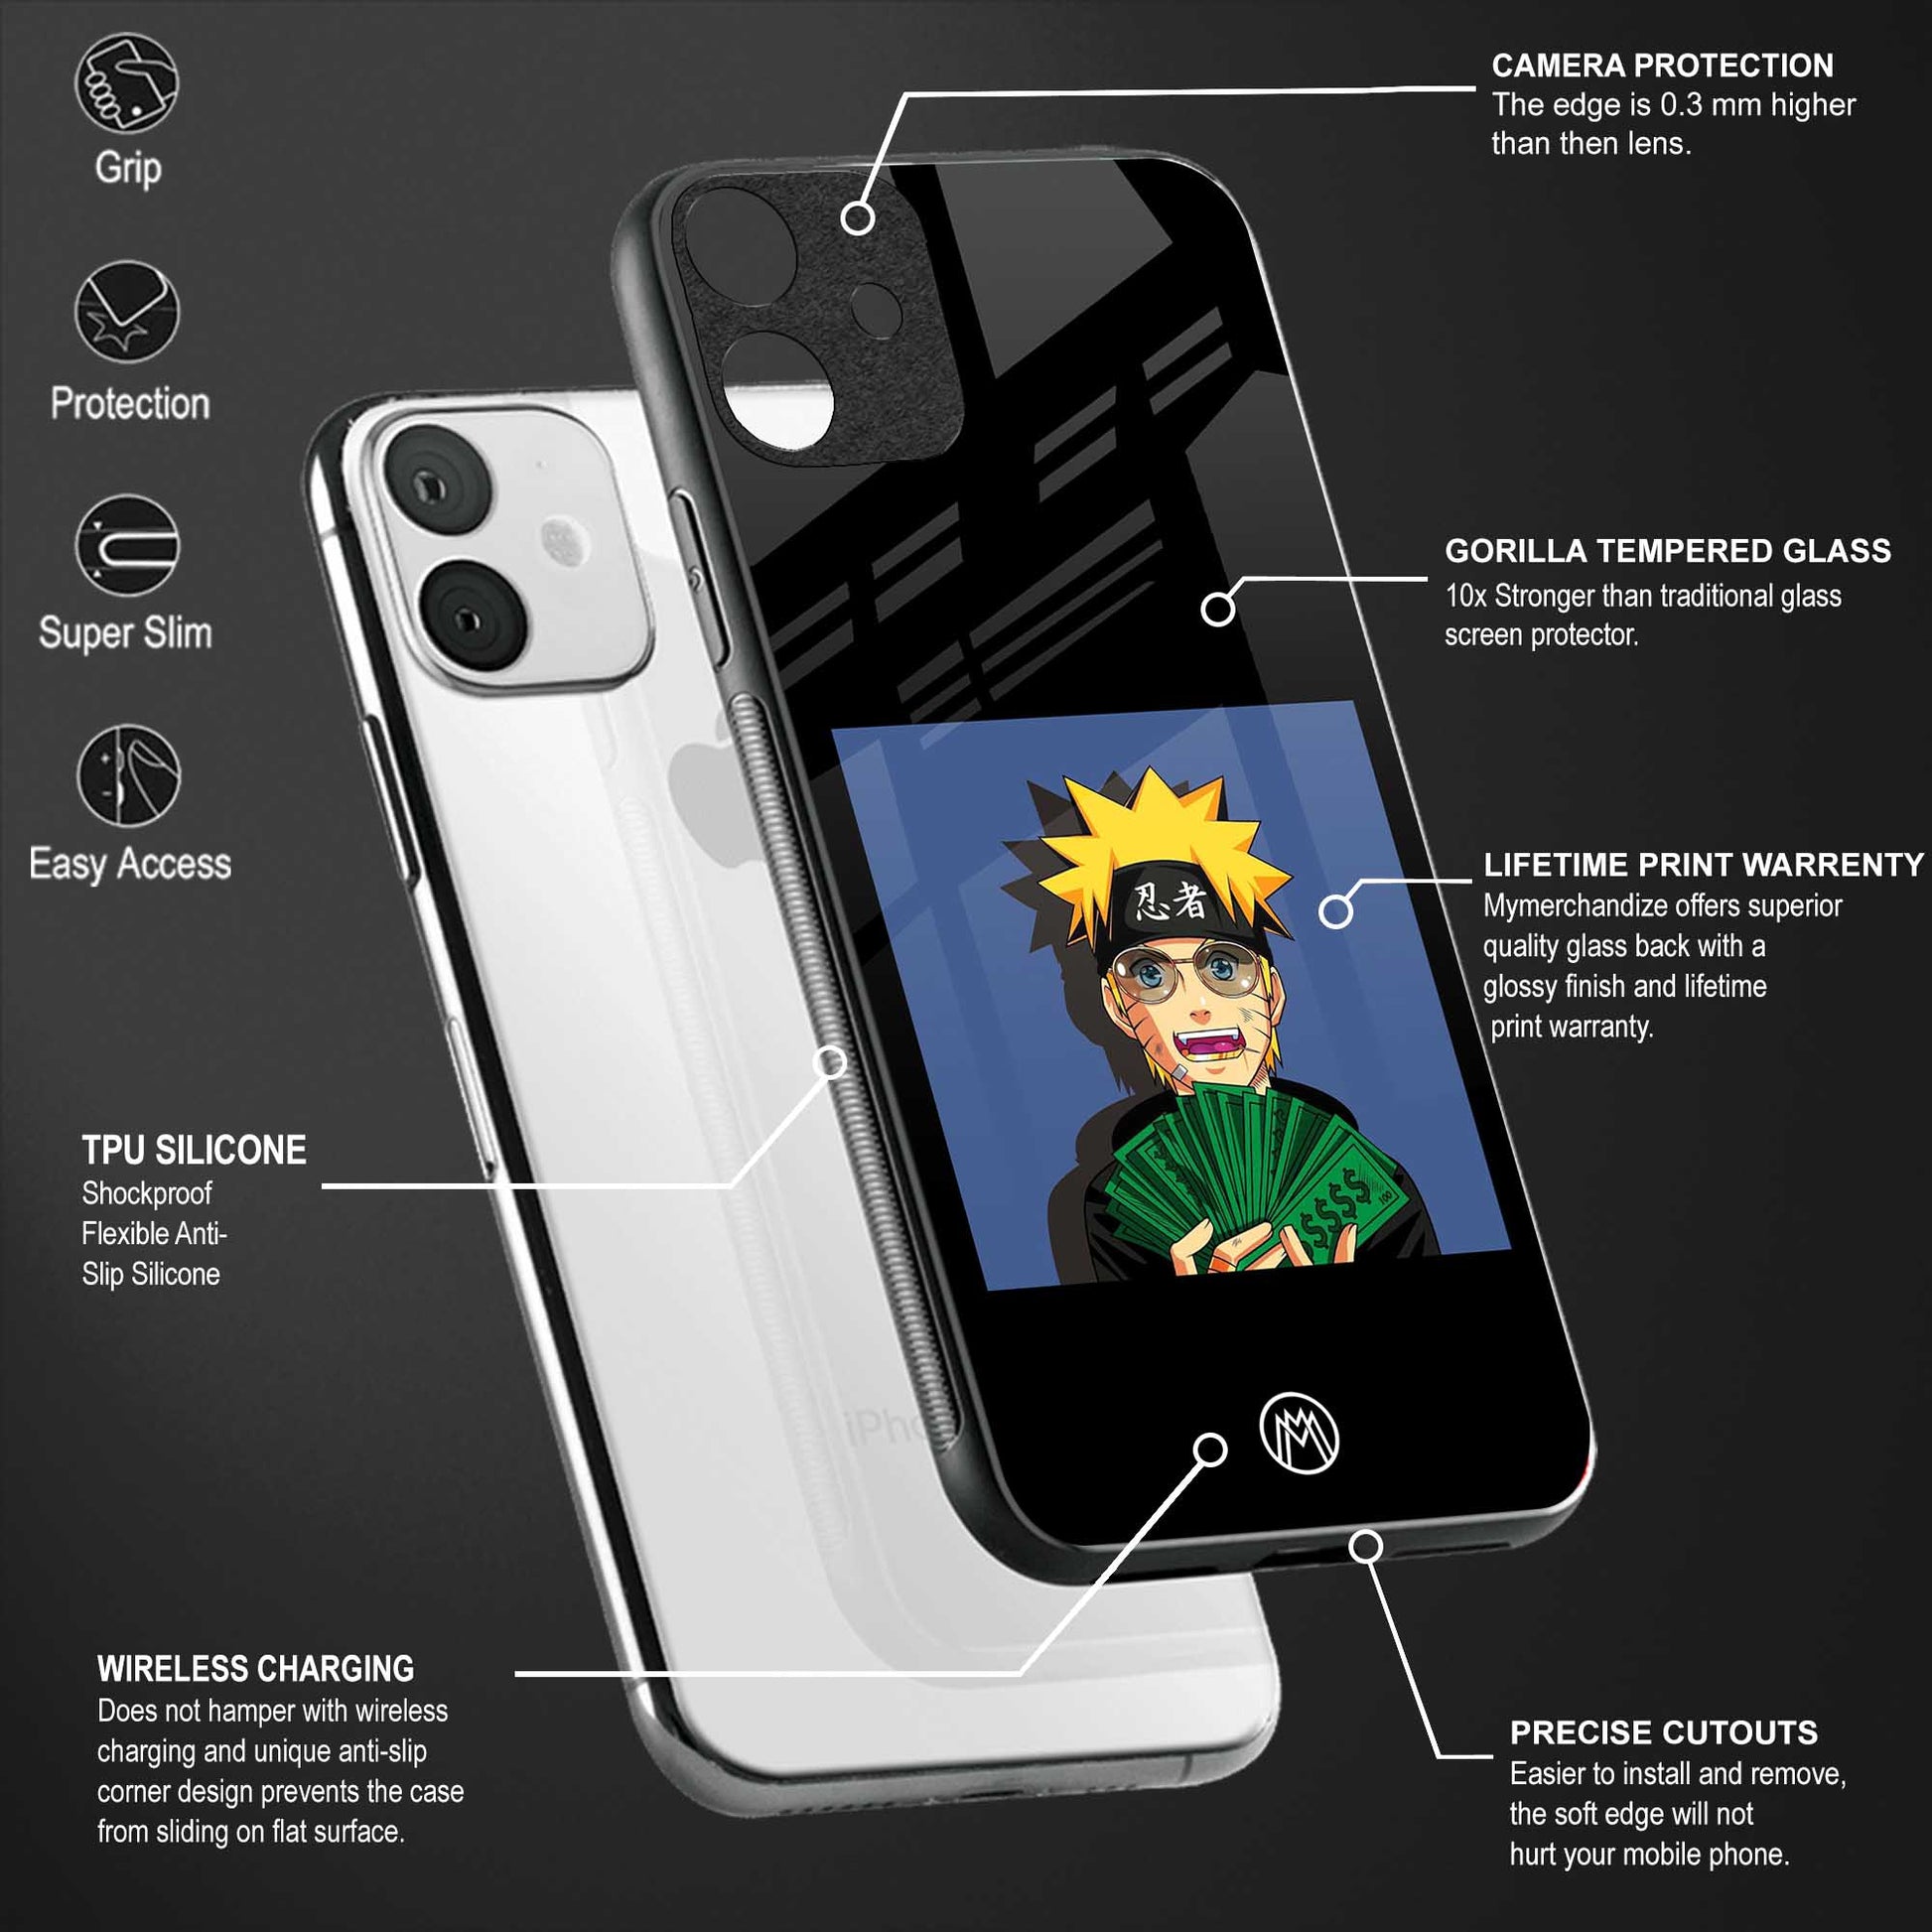 NARUTO HOLOGRAPHIC PHONE CASE